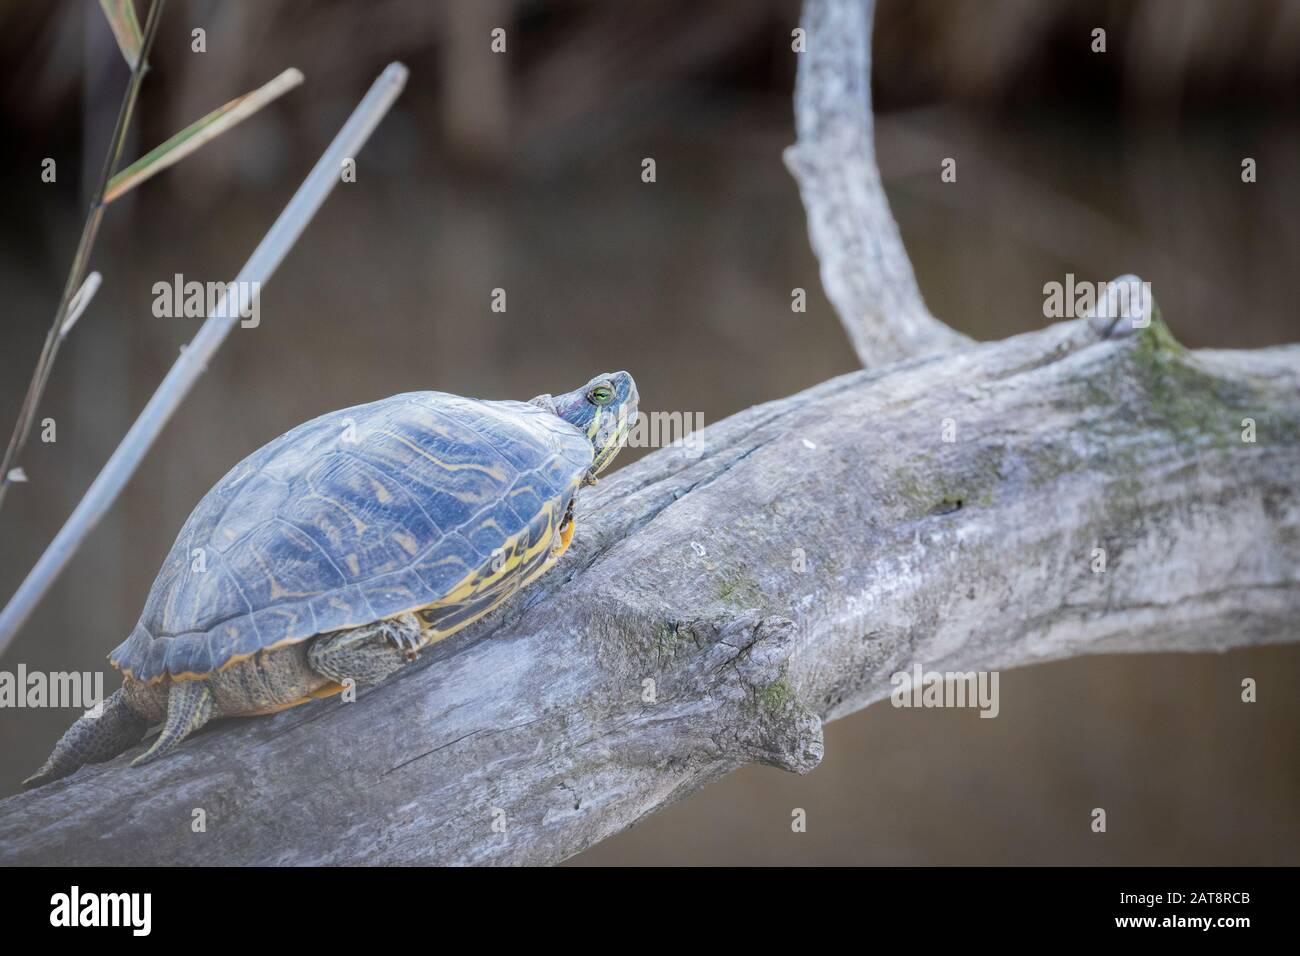 Red-eared slider (Trachemys scripta elegans) resting on a trunk. Natural Areas of the Llobregat Delta. Barcelona province. Catalonia. Spain. Stock Photo